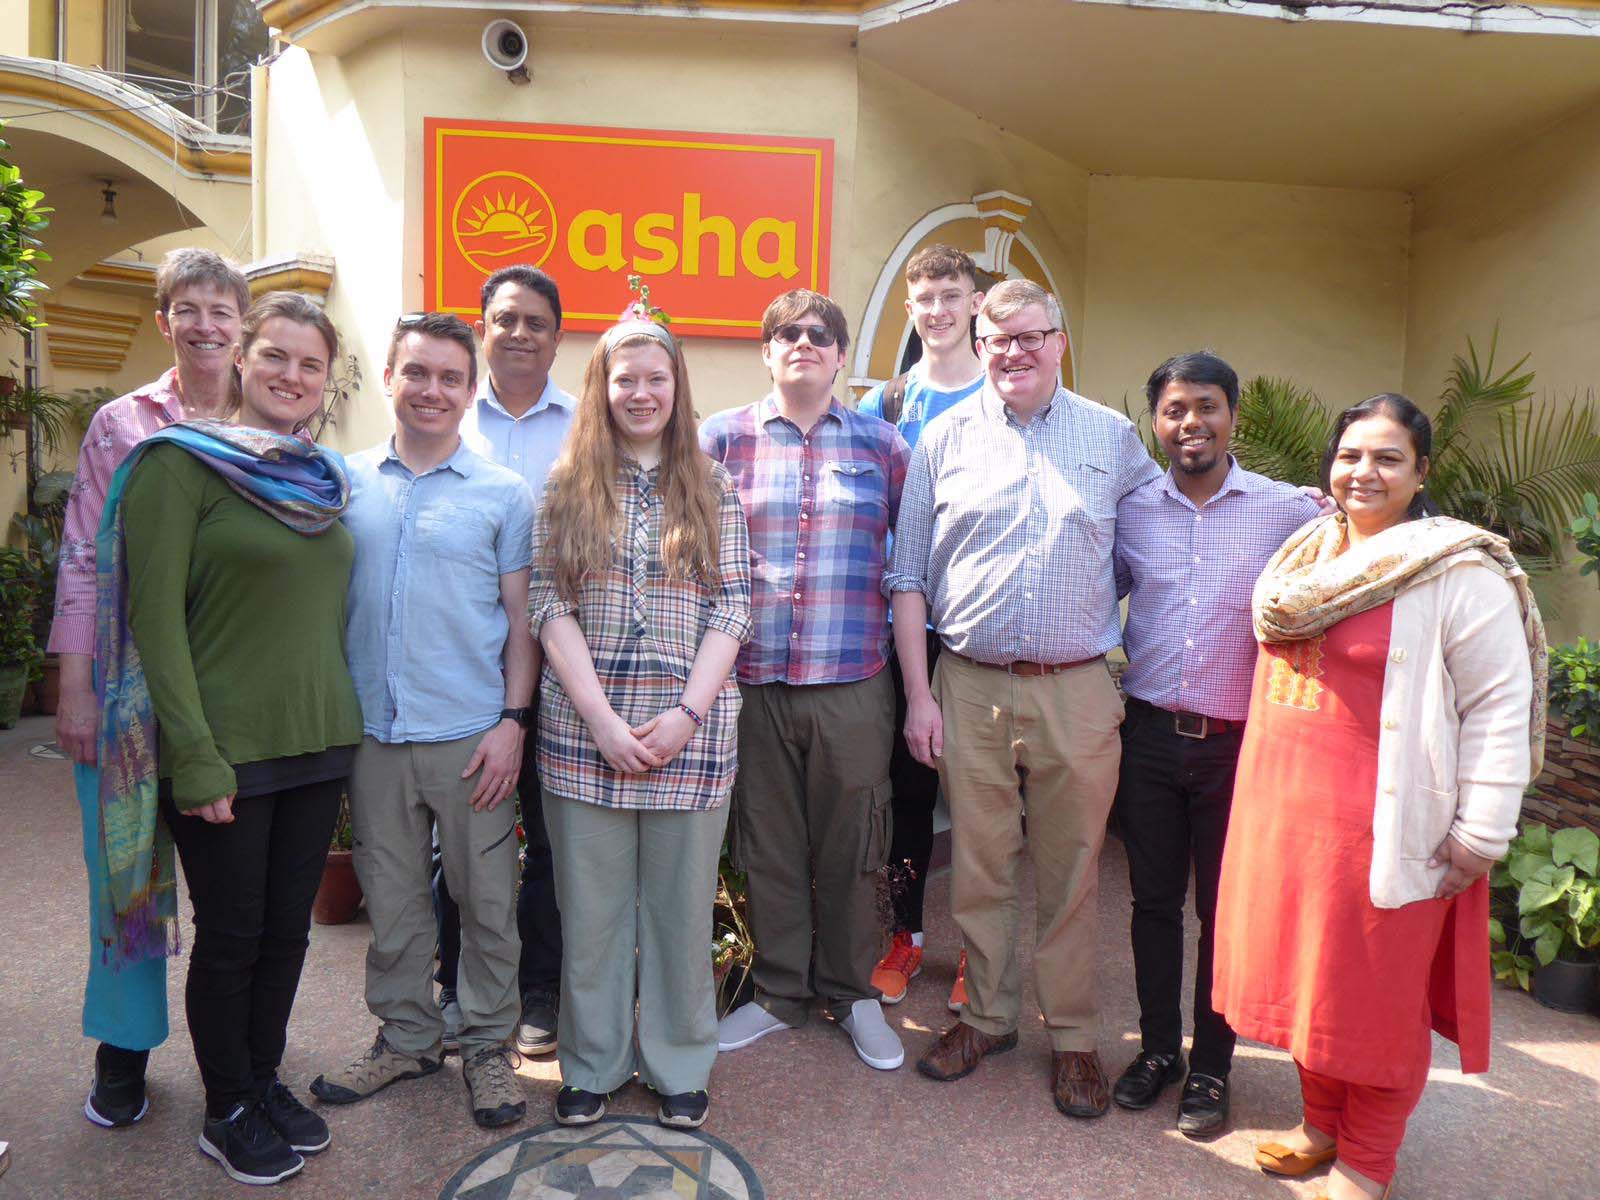 The Holywood Parish team, which returned in March 2020, with staff at Asha's headquarters.